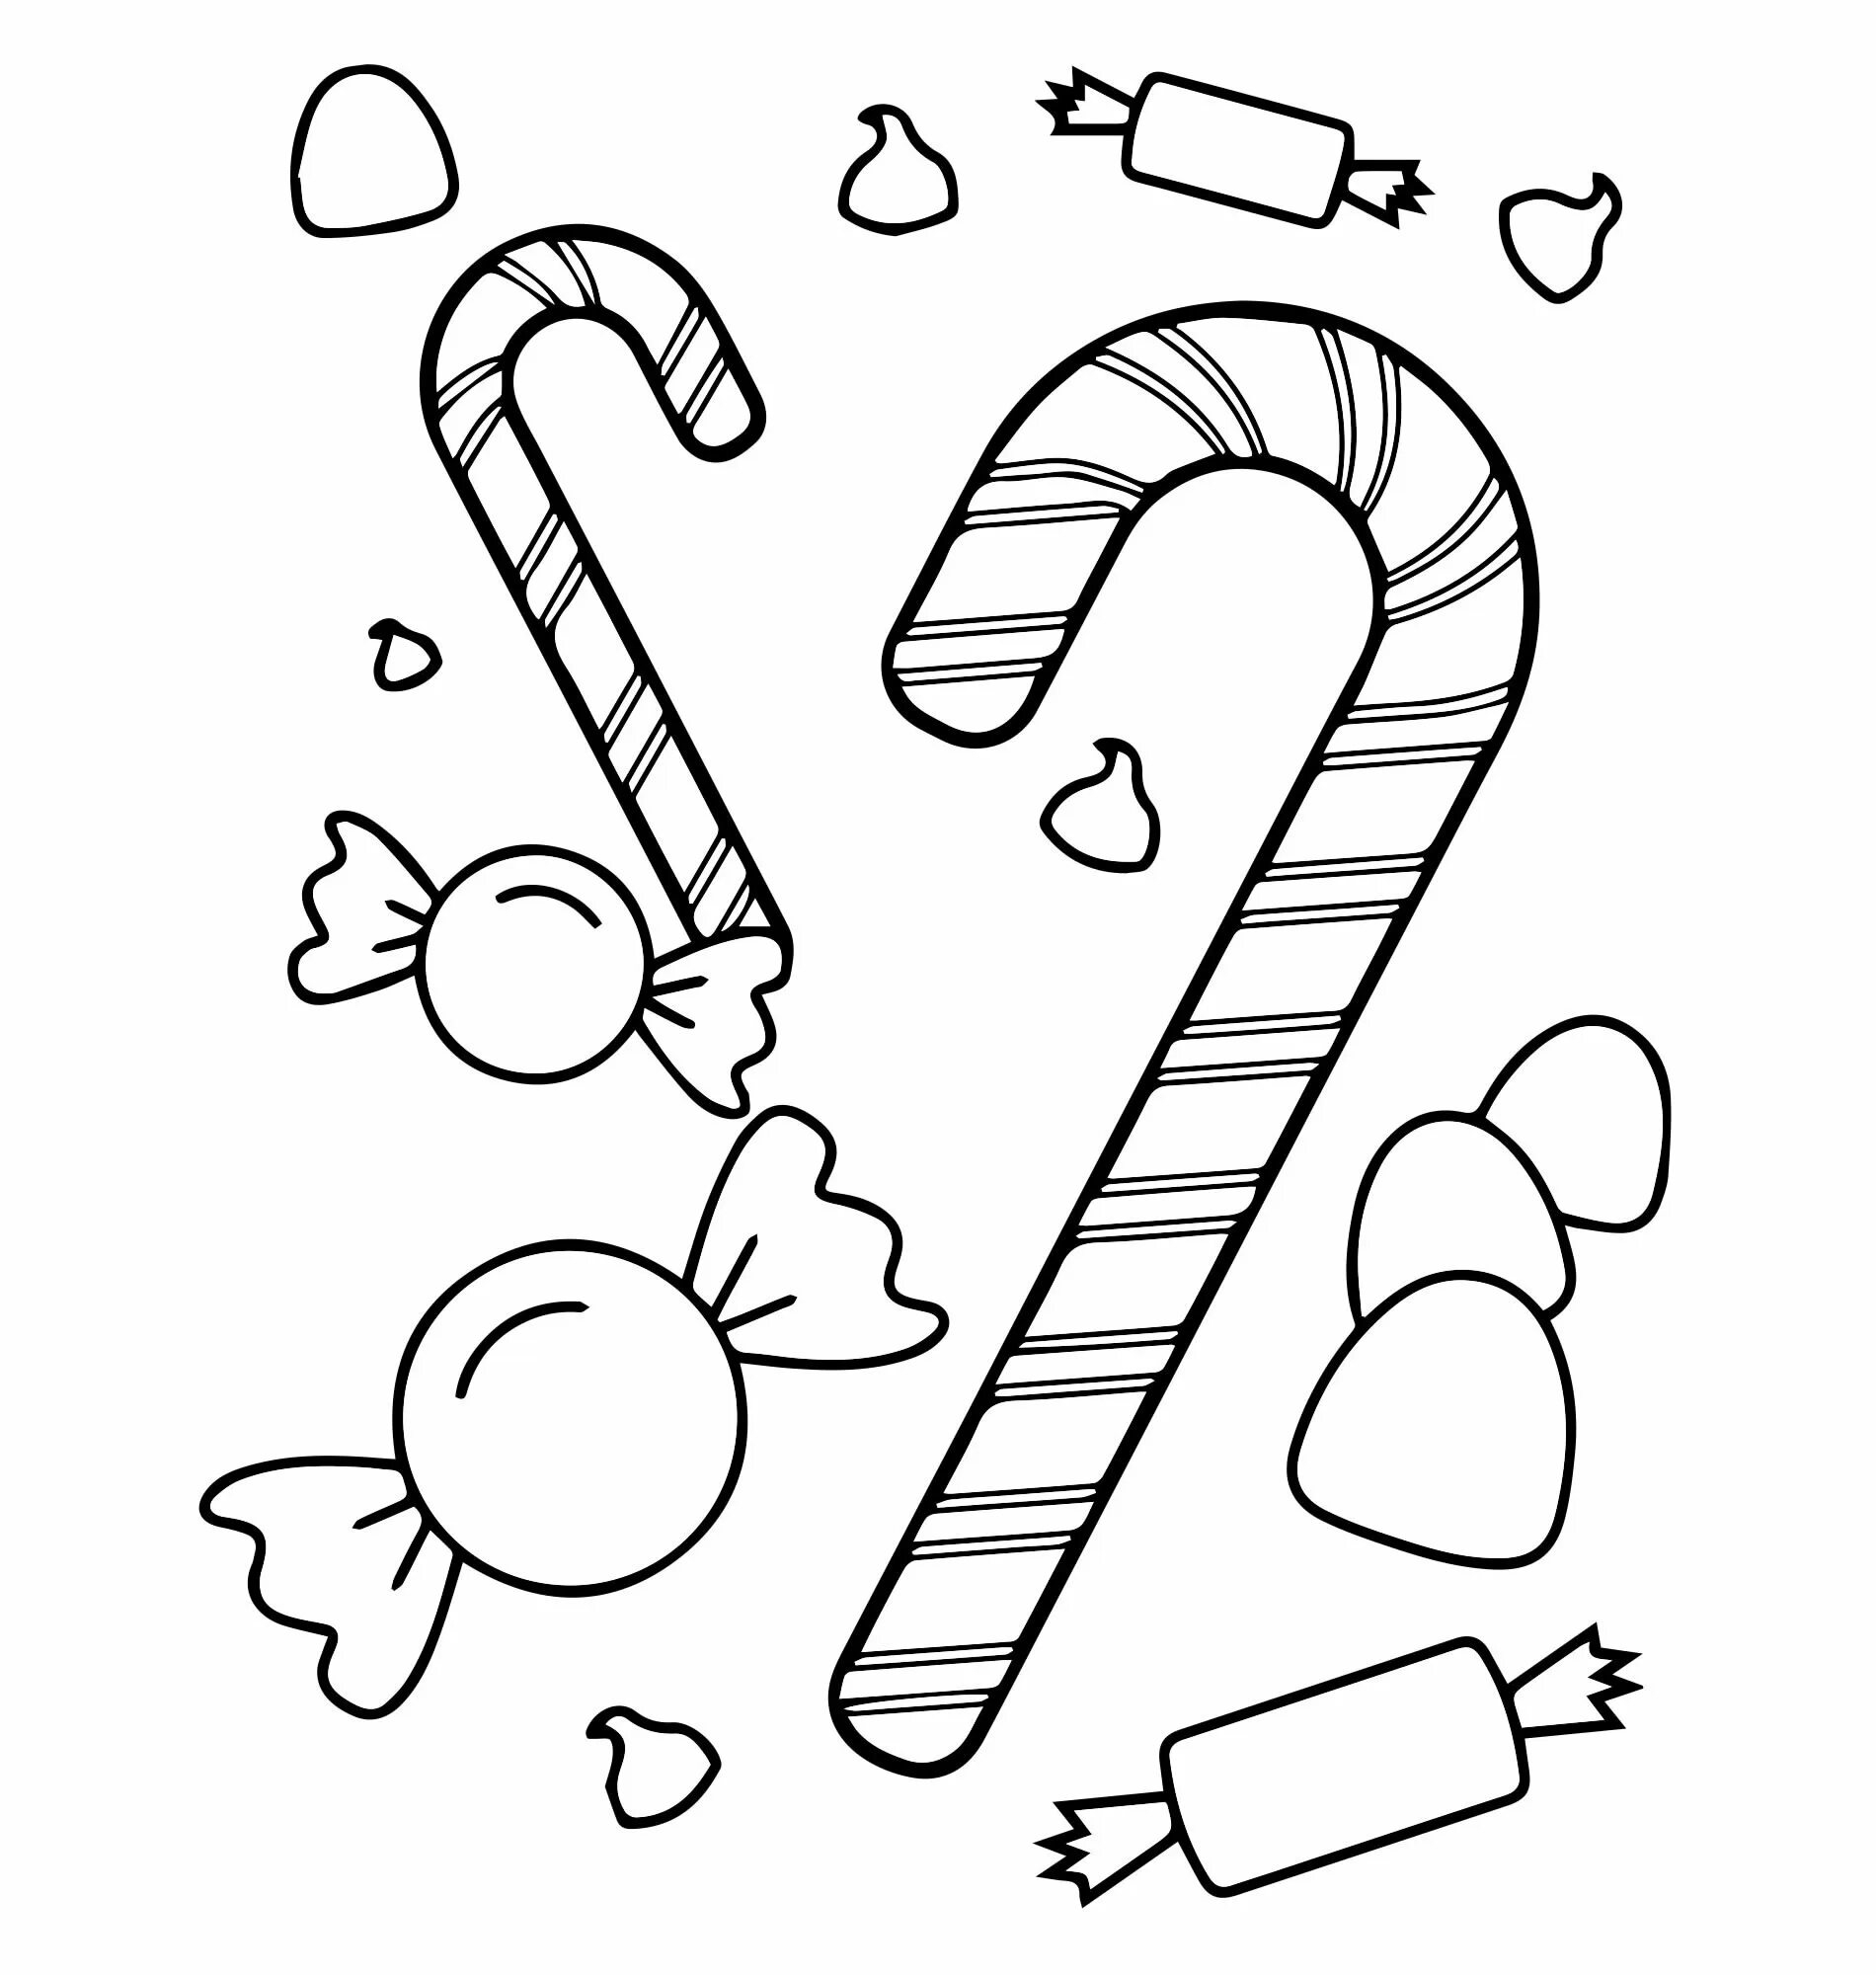 Coloring page inviting sweets